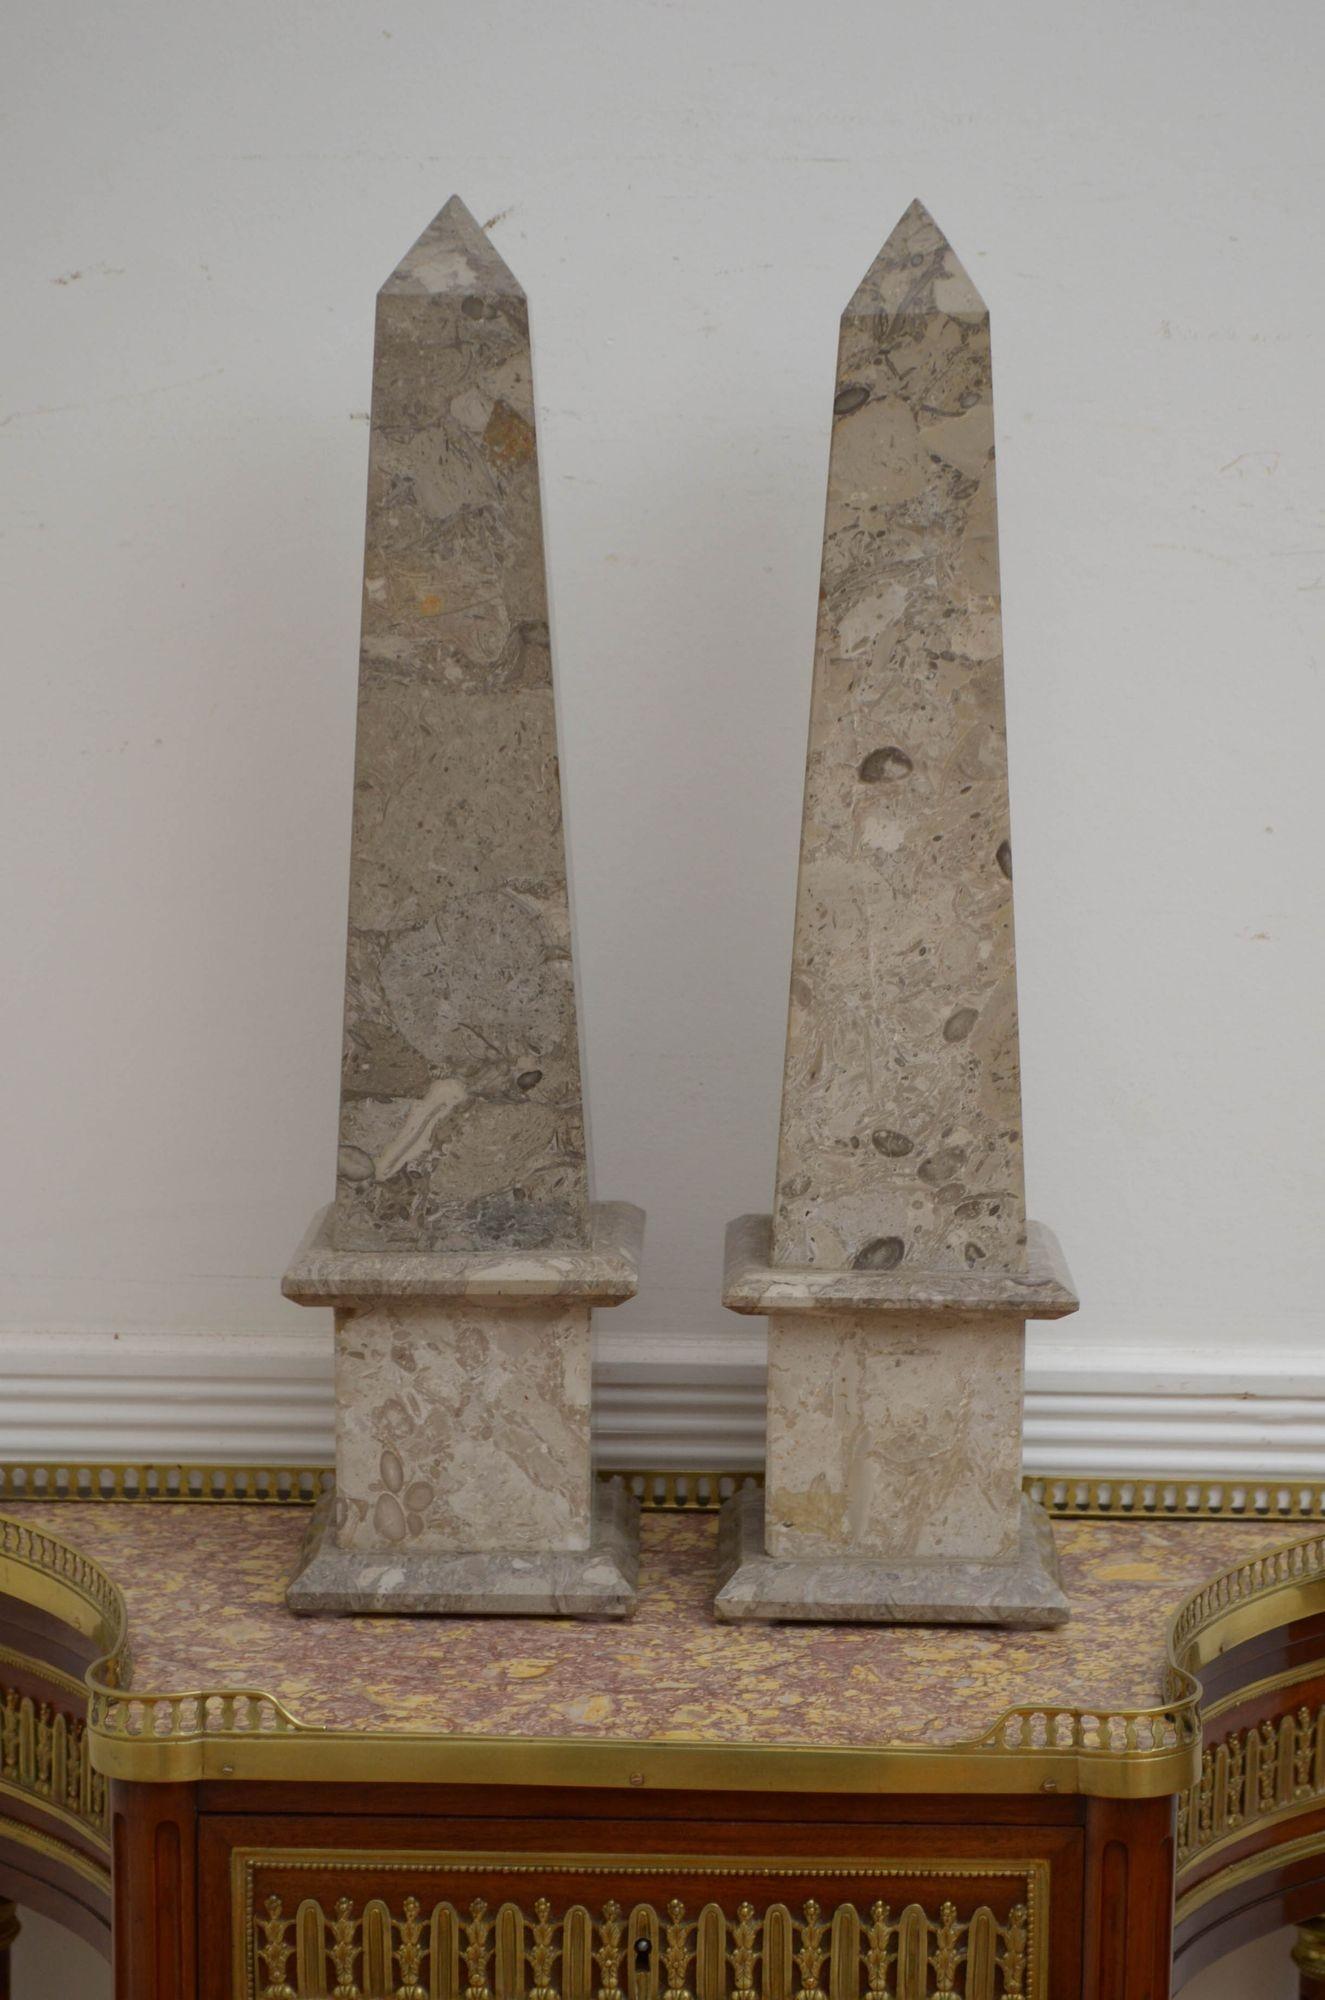 Sn5384 Excellent pair of very stylish grey fossilised marble obelisks. All in home ready condition, one small chip to each one. Early Mid-20th Century.
Measures: H22